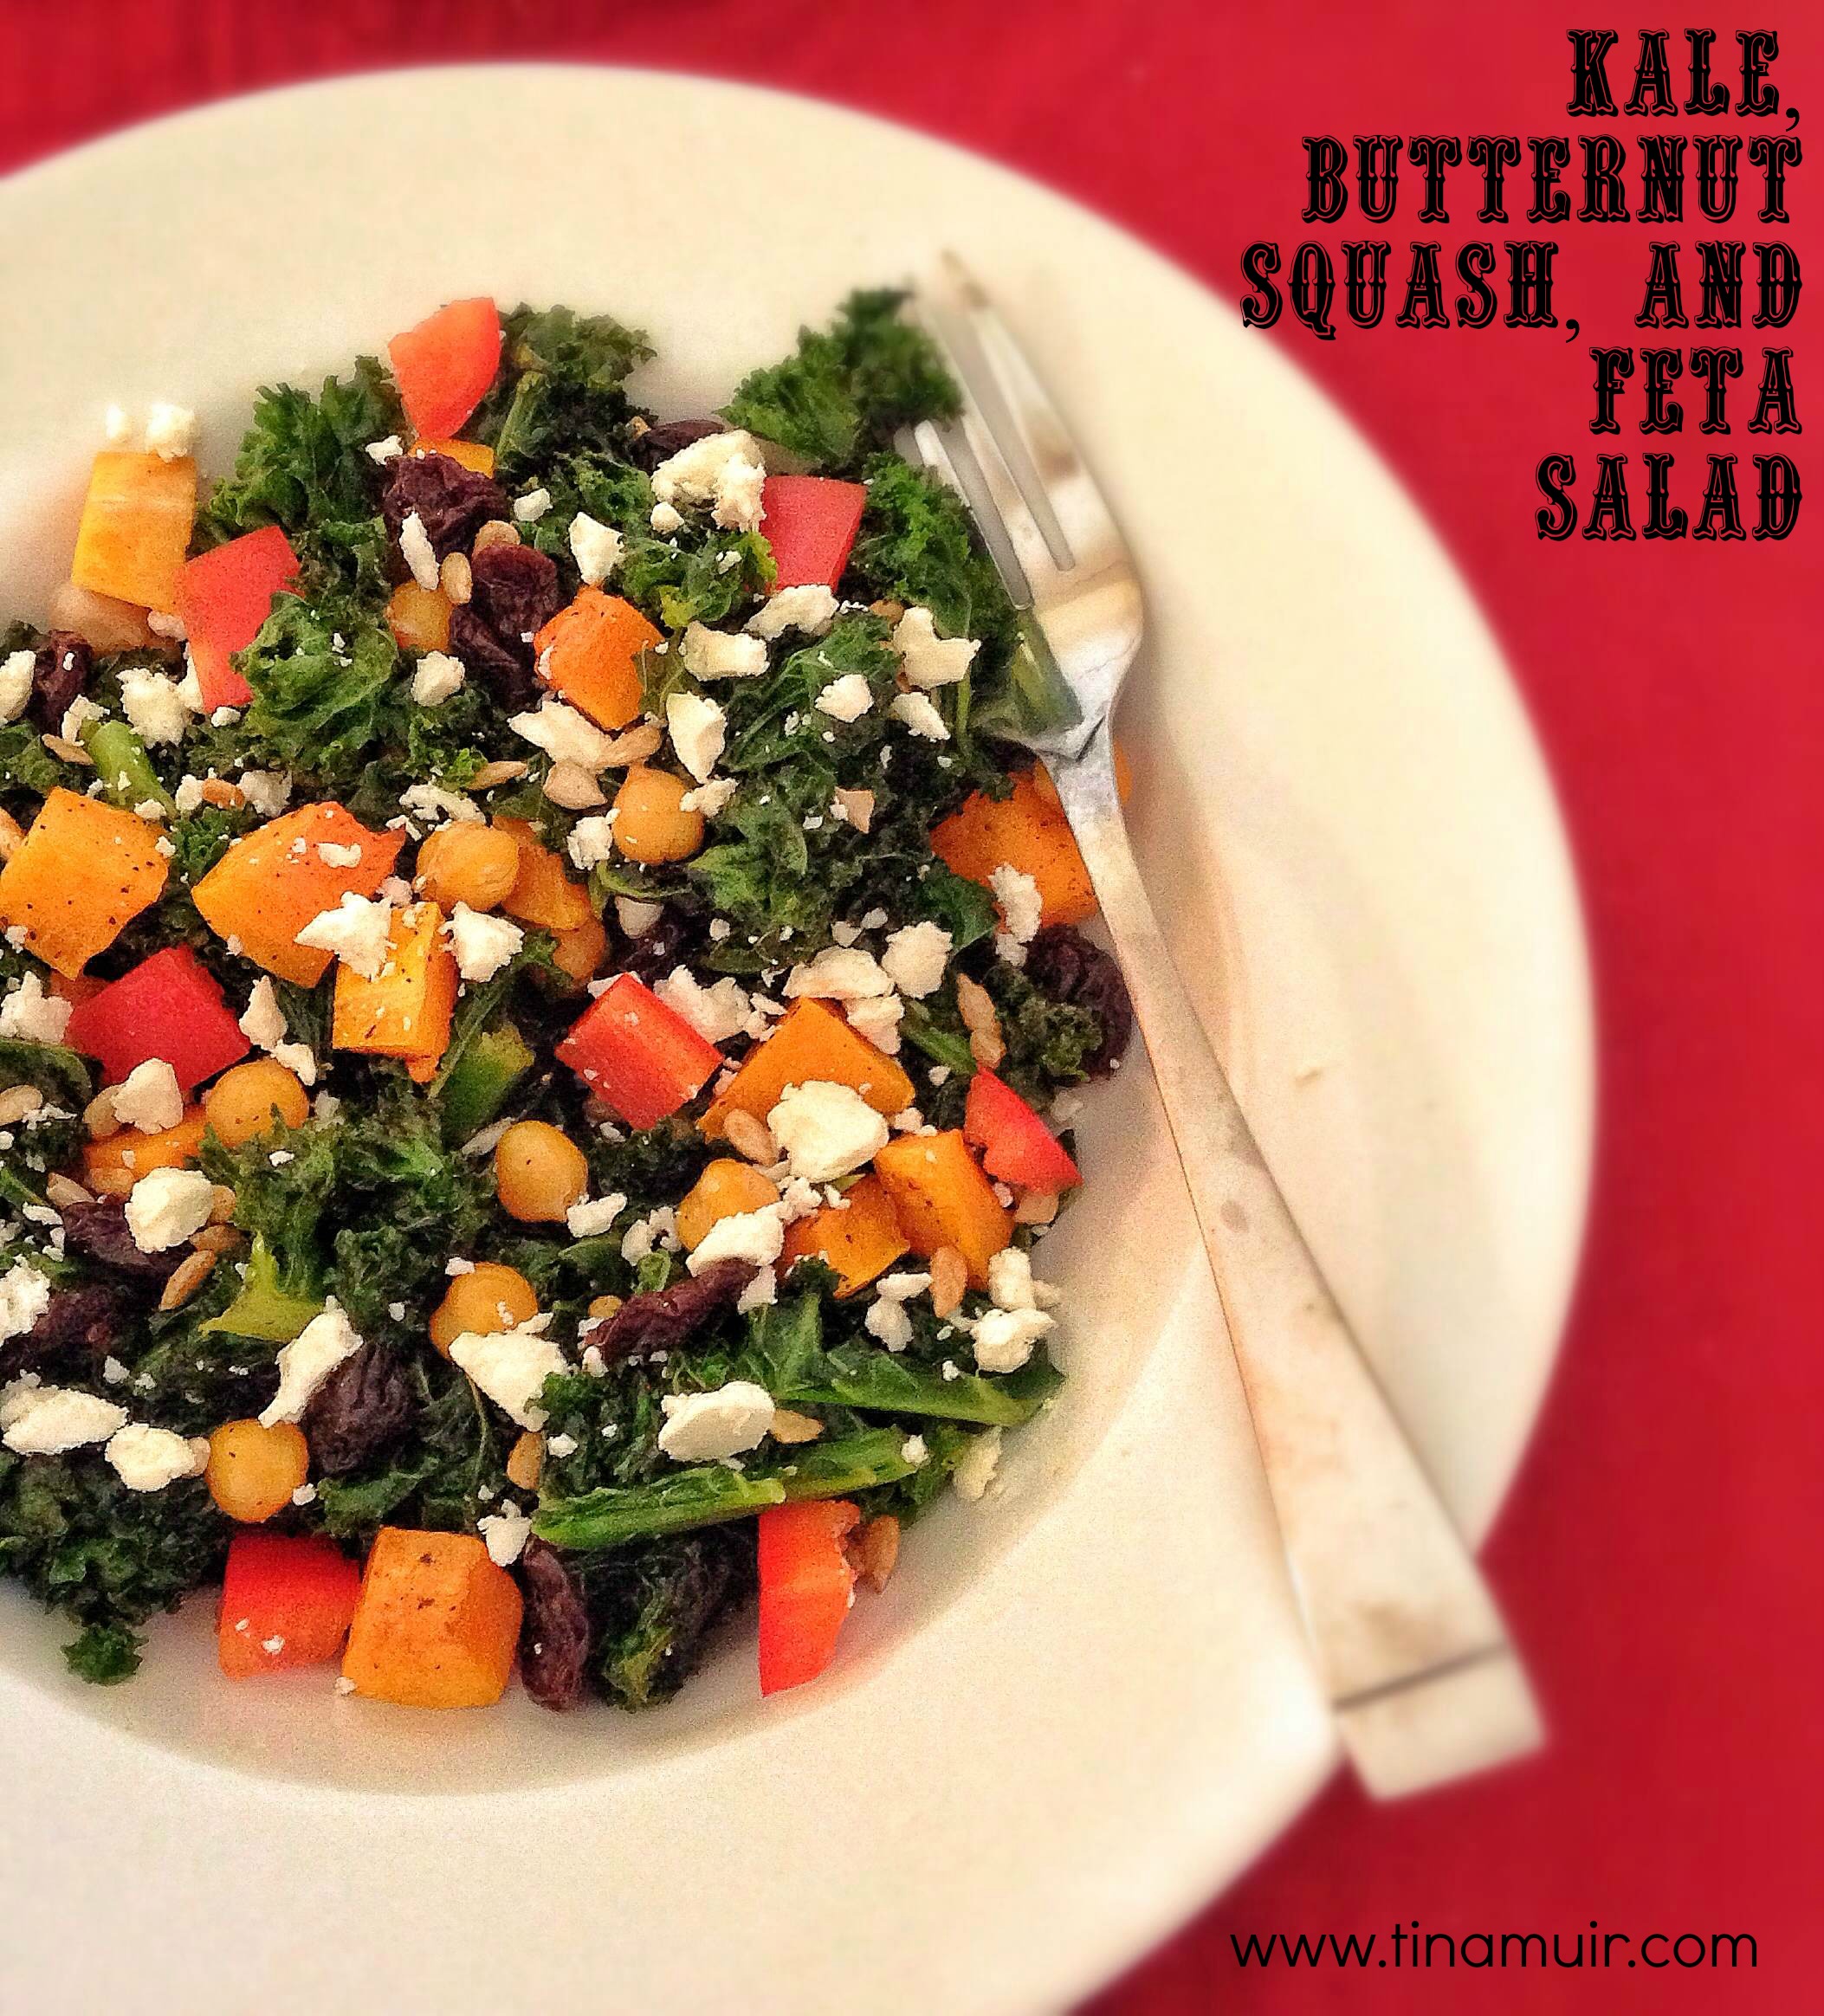 Using fall favorite ingredients to create a delicious, quick salad to speed recovery